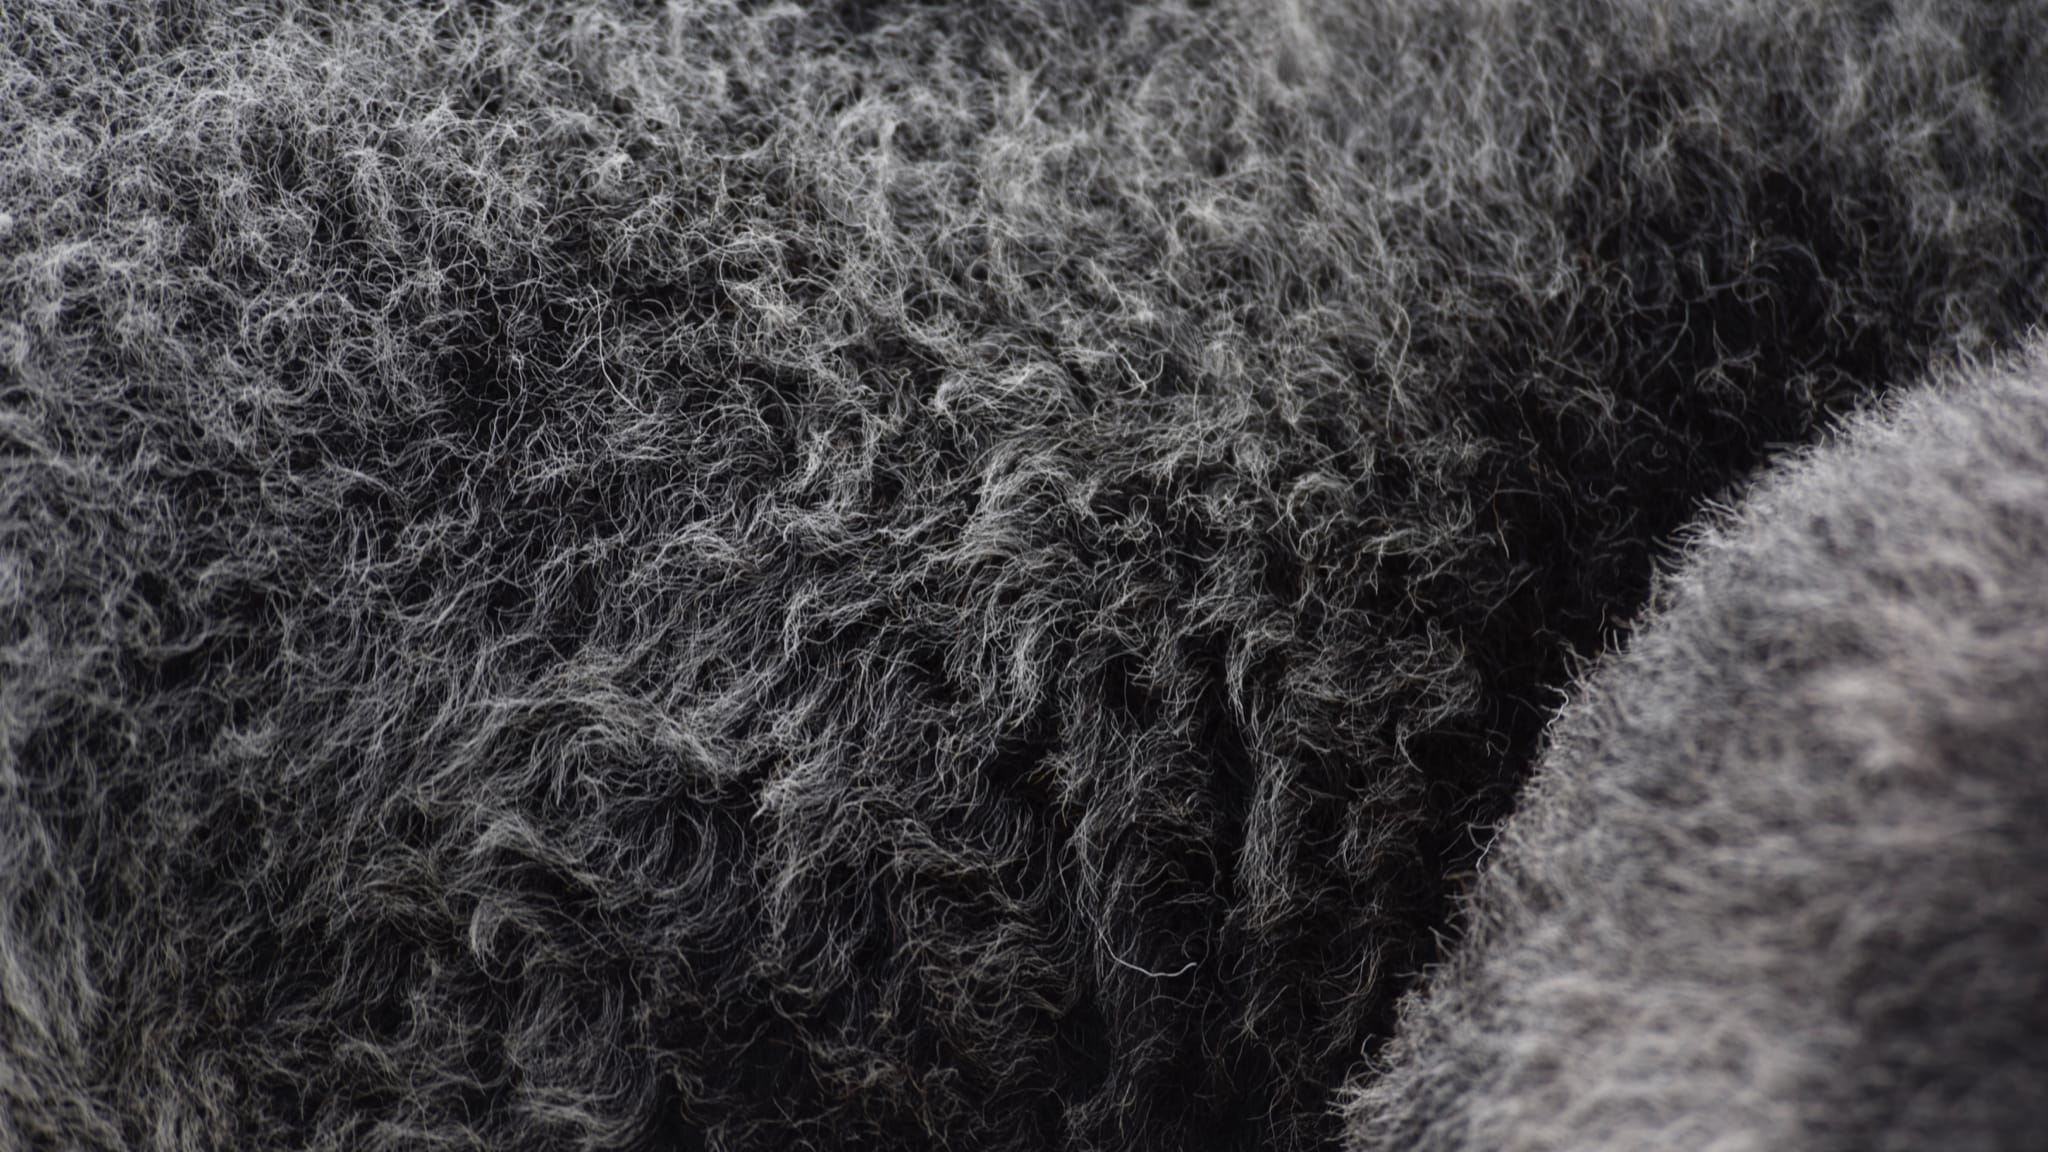 Wool is stain resistant due to the presence of lanolin in the fibres